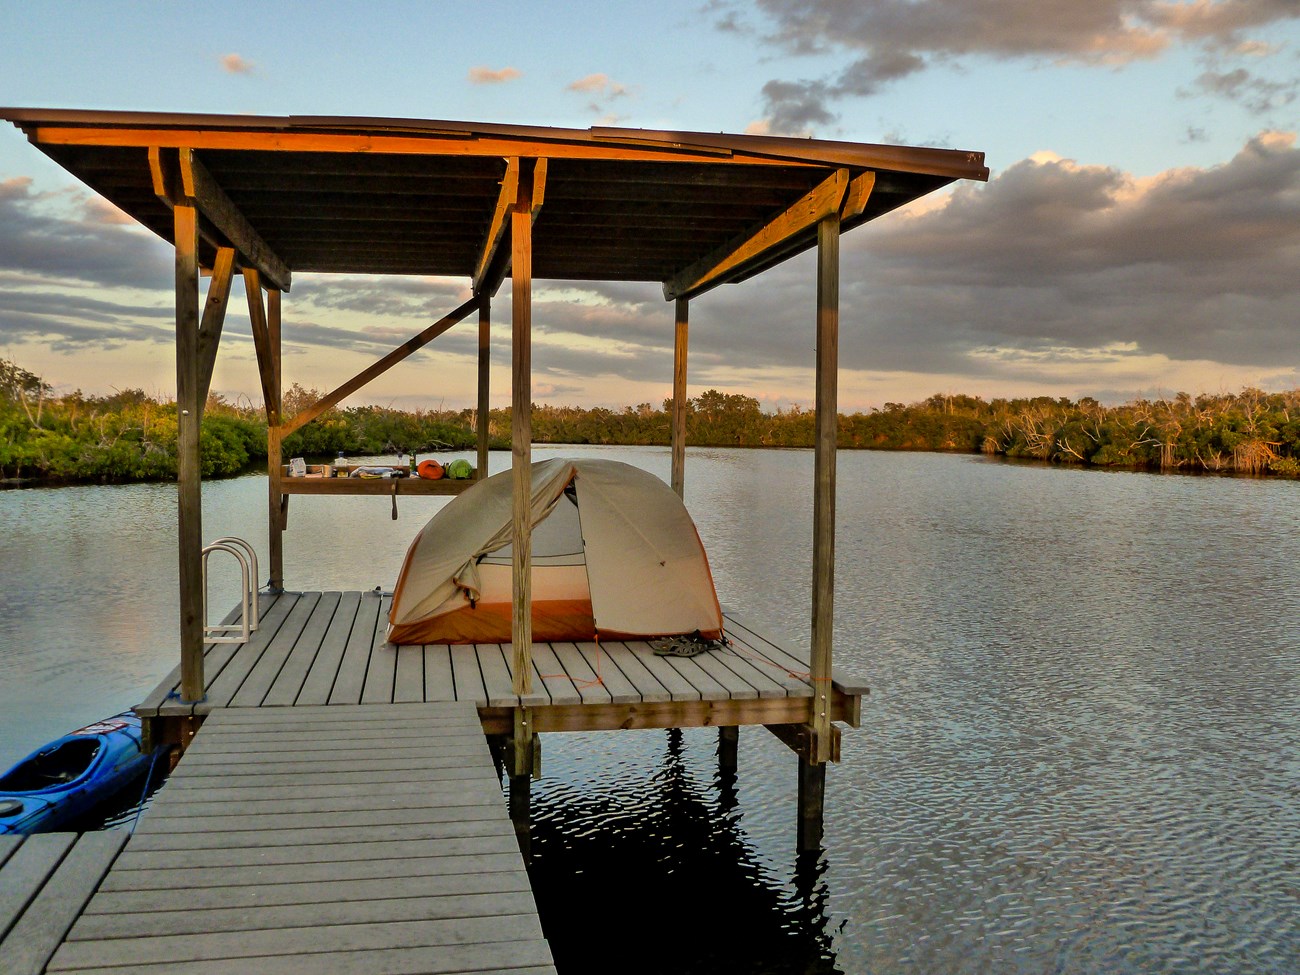 A tent and camping gear on a lifted wooden platform, above water. A kayak is on the side of the platform.